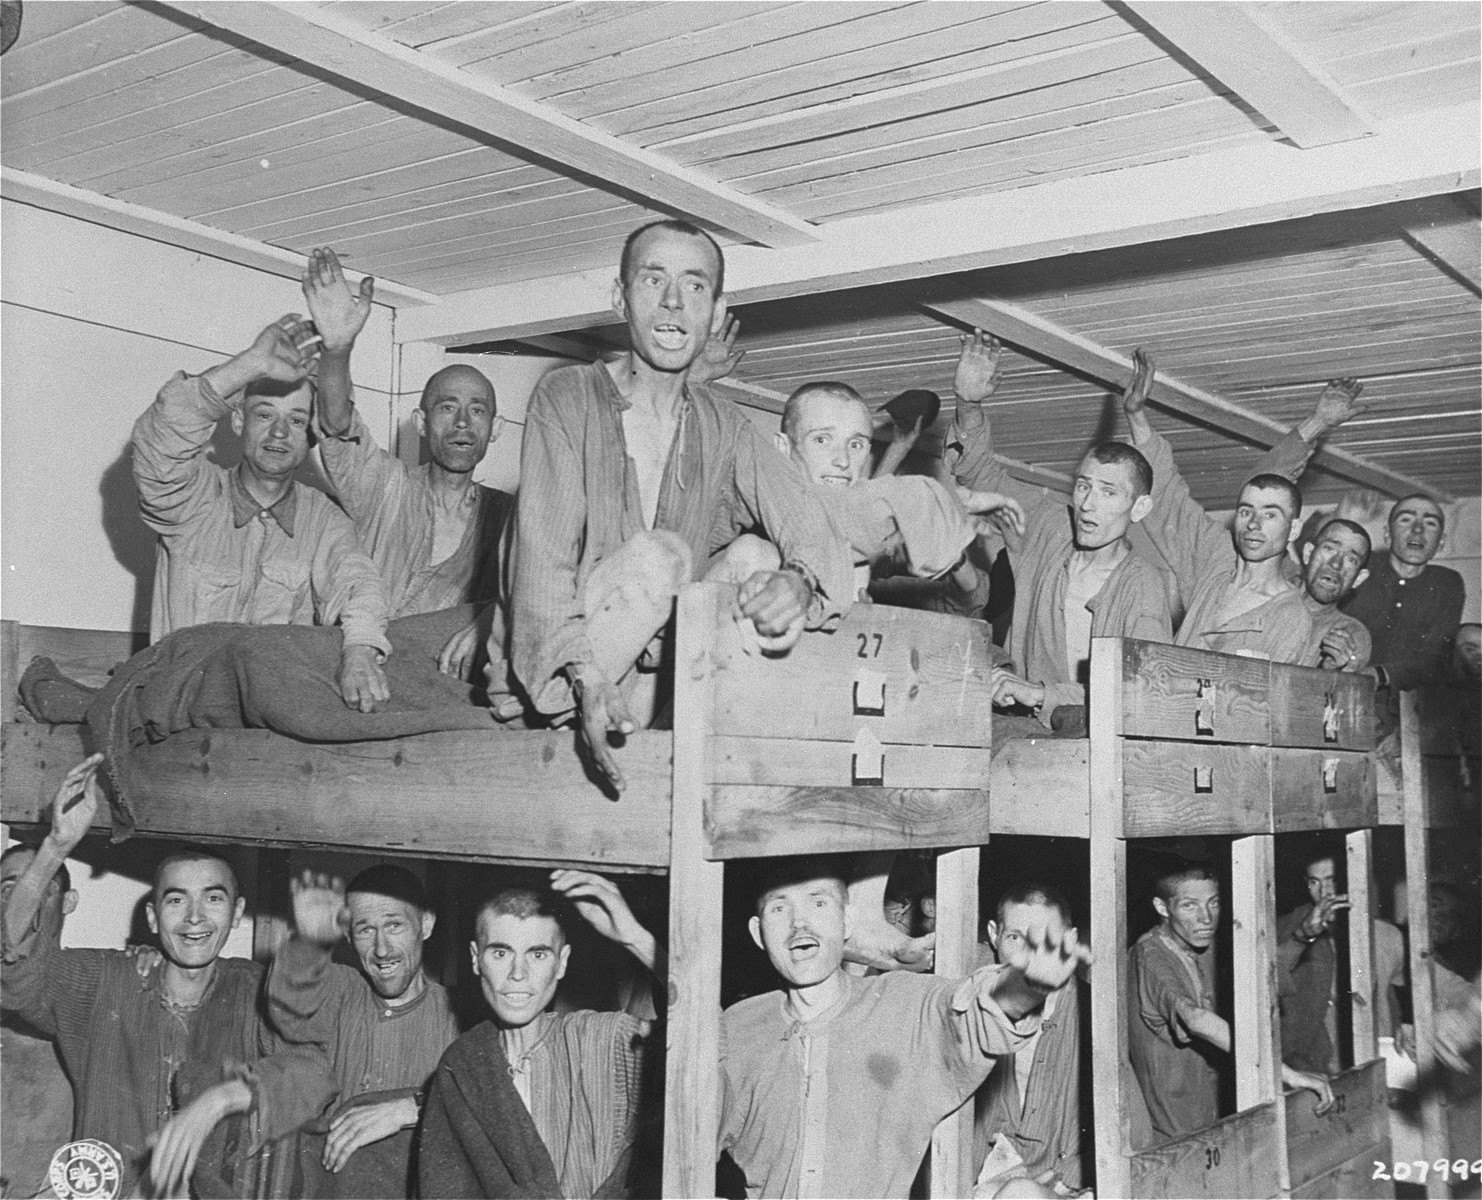 Survivors wave to American liberators from their bunks in the infirmary barracks for Jewish prisoners in the Ebensee concentration camp.

Among those pictured is Moshe Haelion (lower bunk, second from the right).